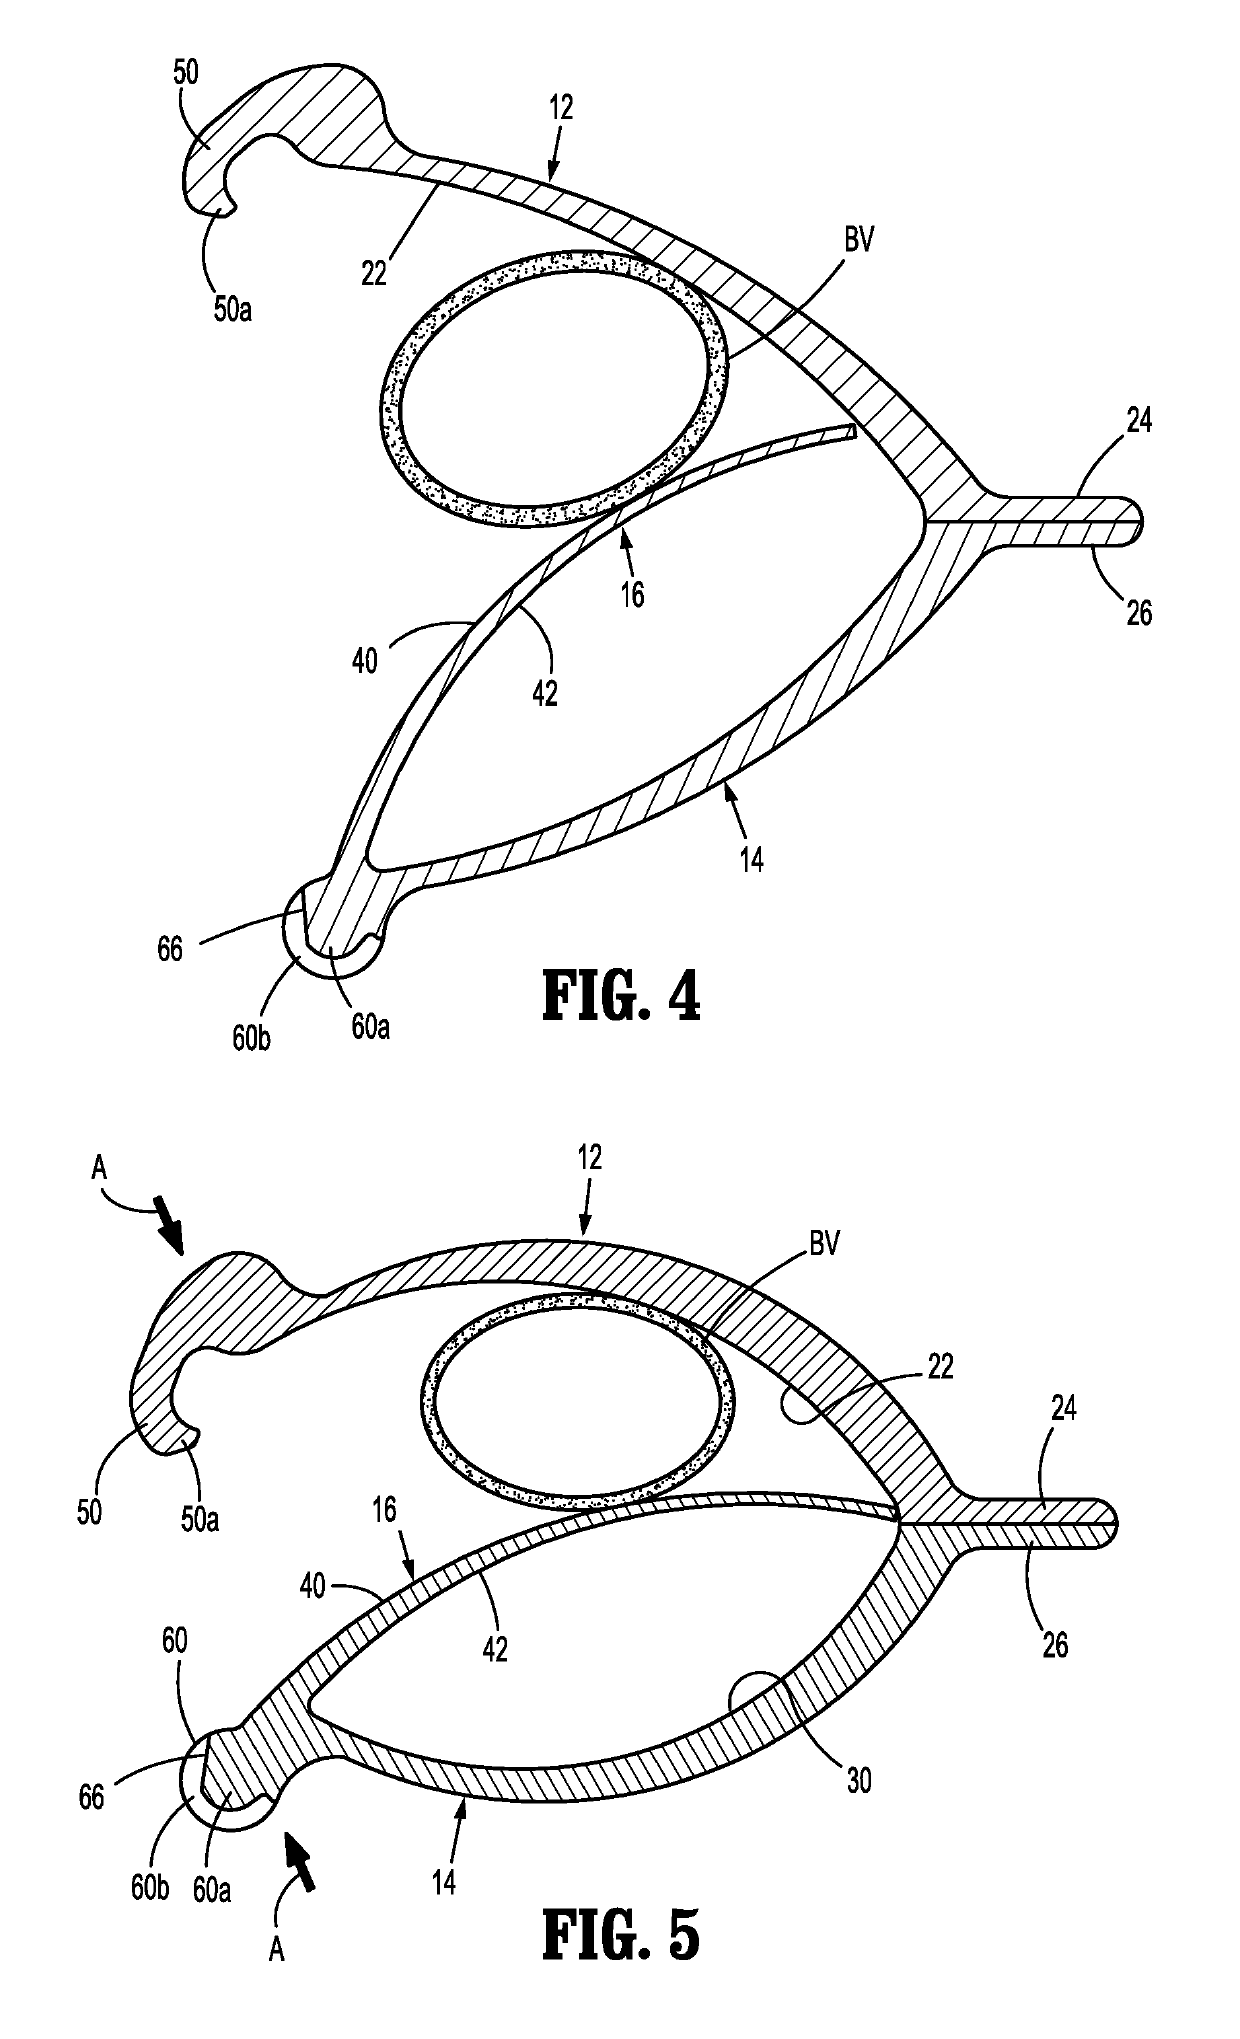 Ligation clip with controlled tissue compression